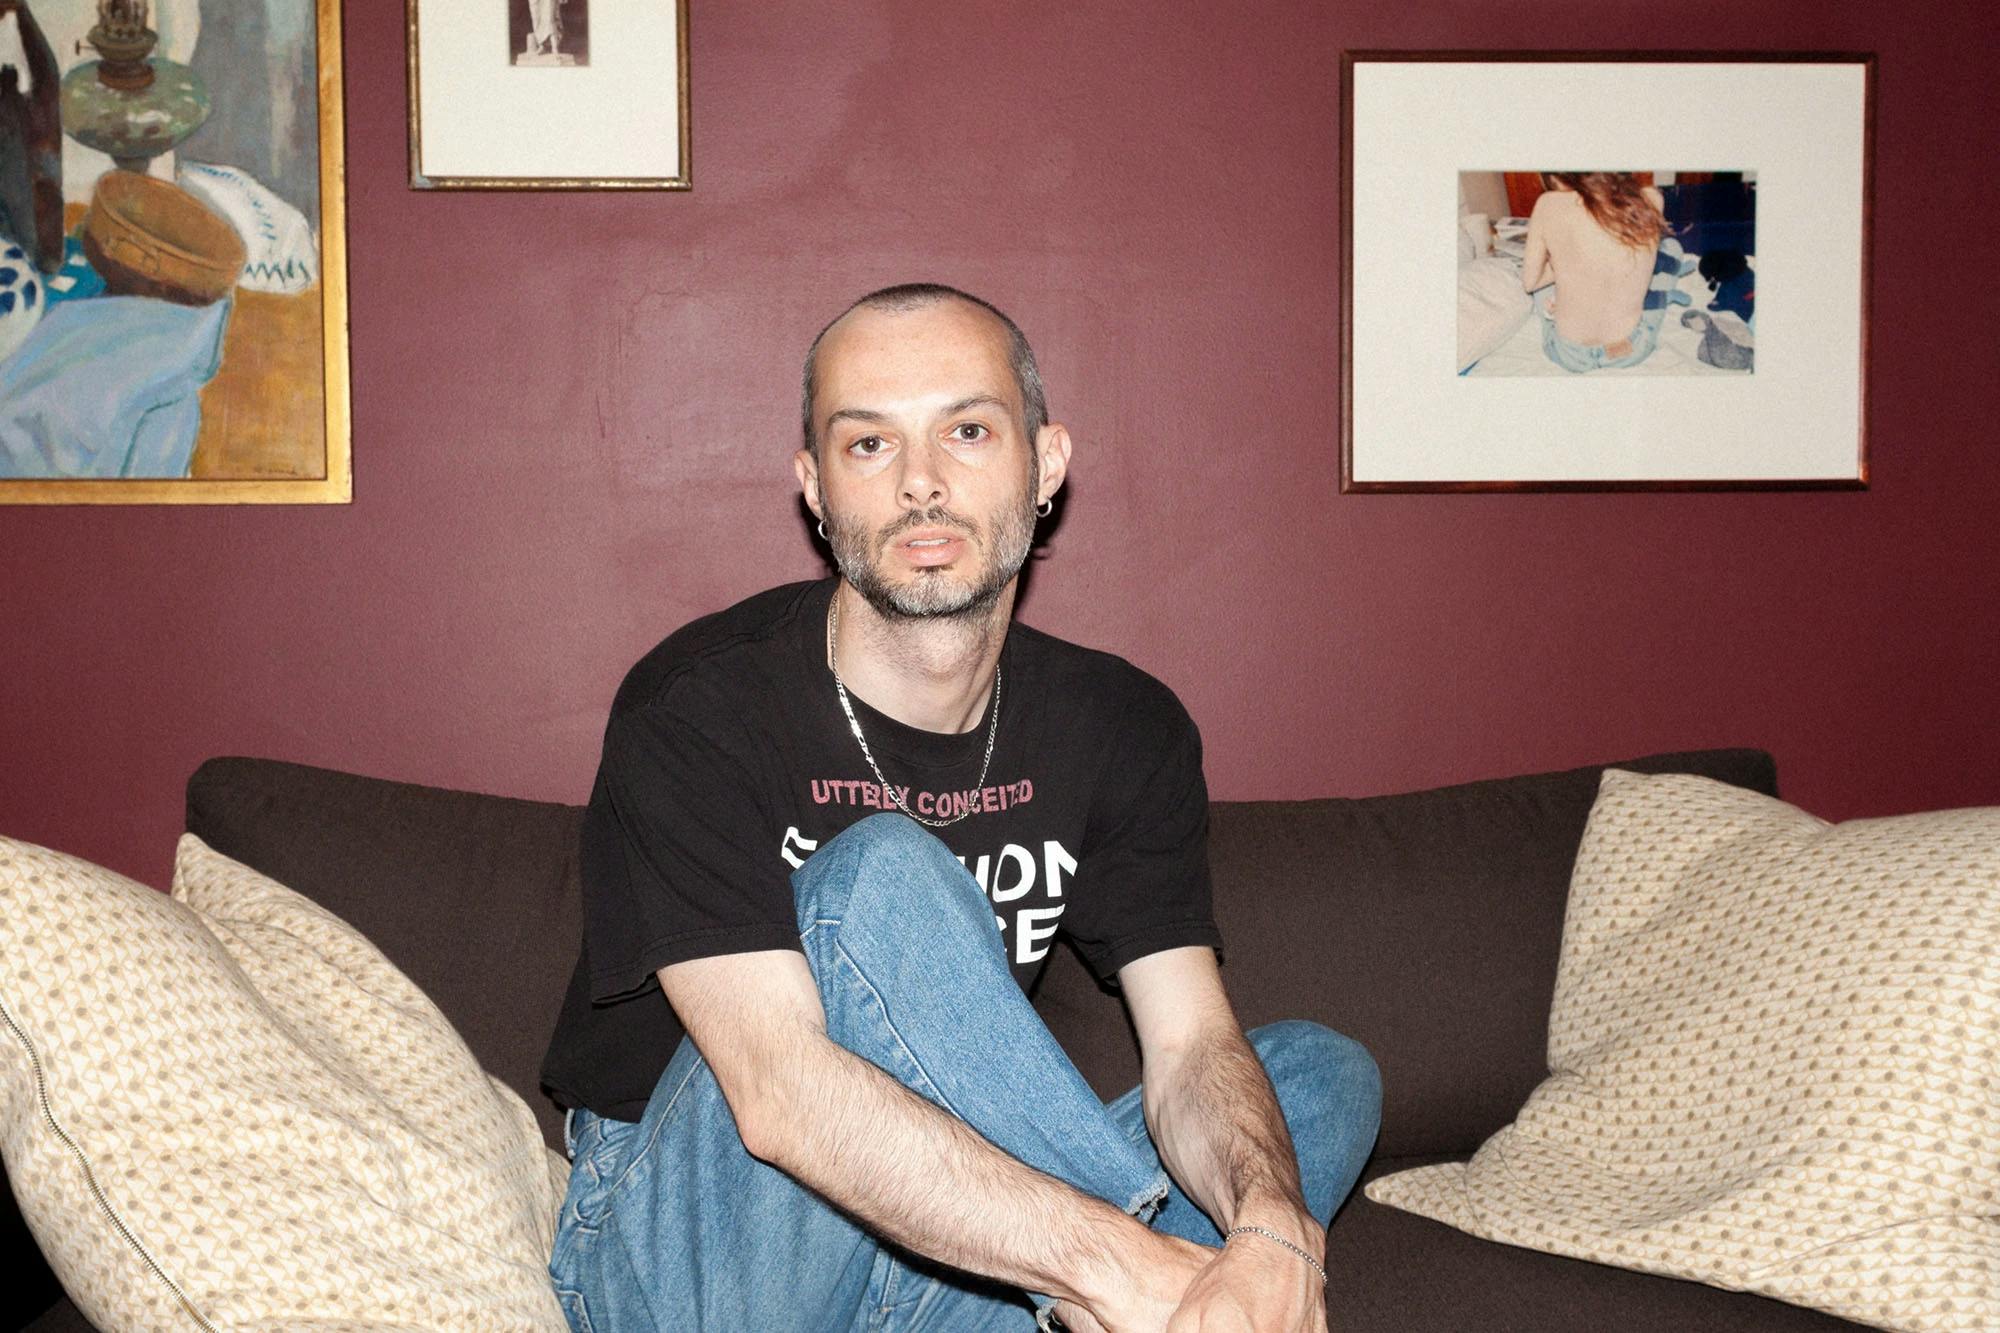 Portrait of Sean Santiago wearing a brown graphic tee and blue jeans, sitting on a sofa in front of a maroon-colored wall with framed artwork.